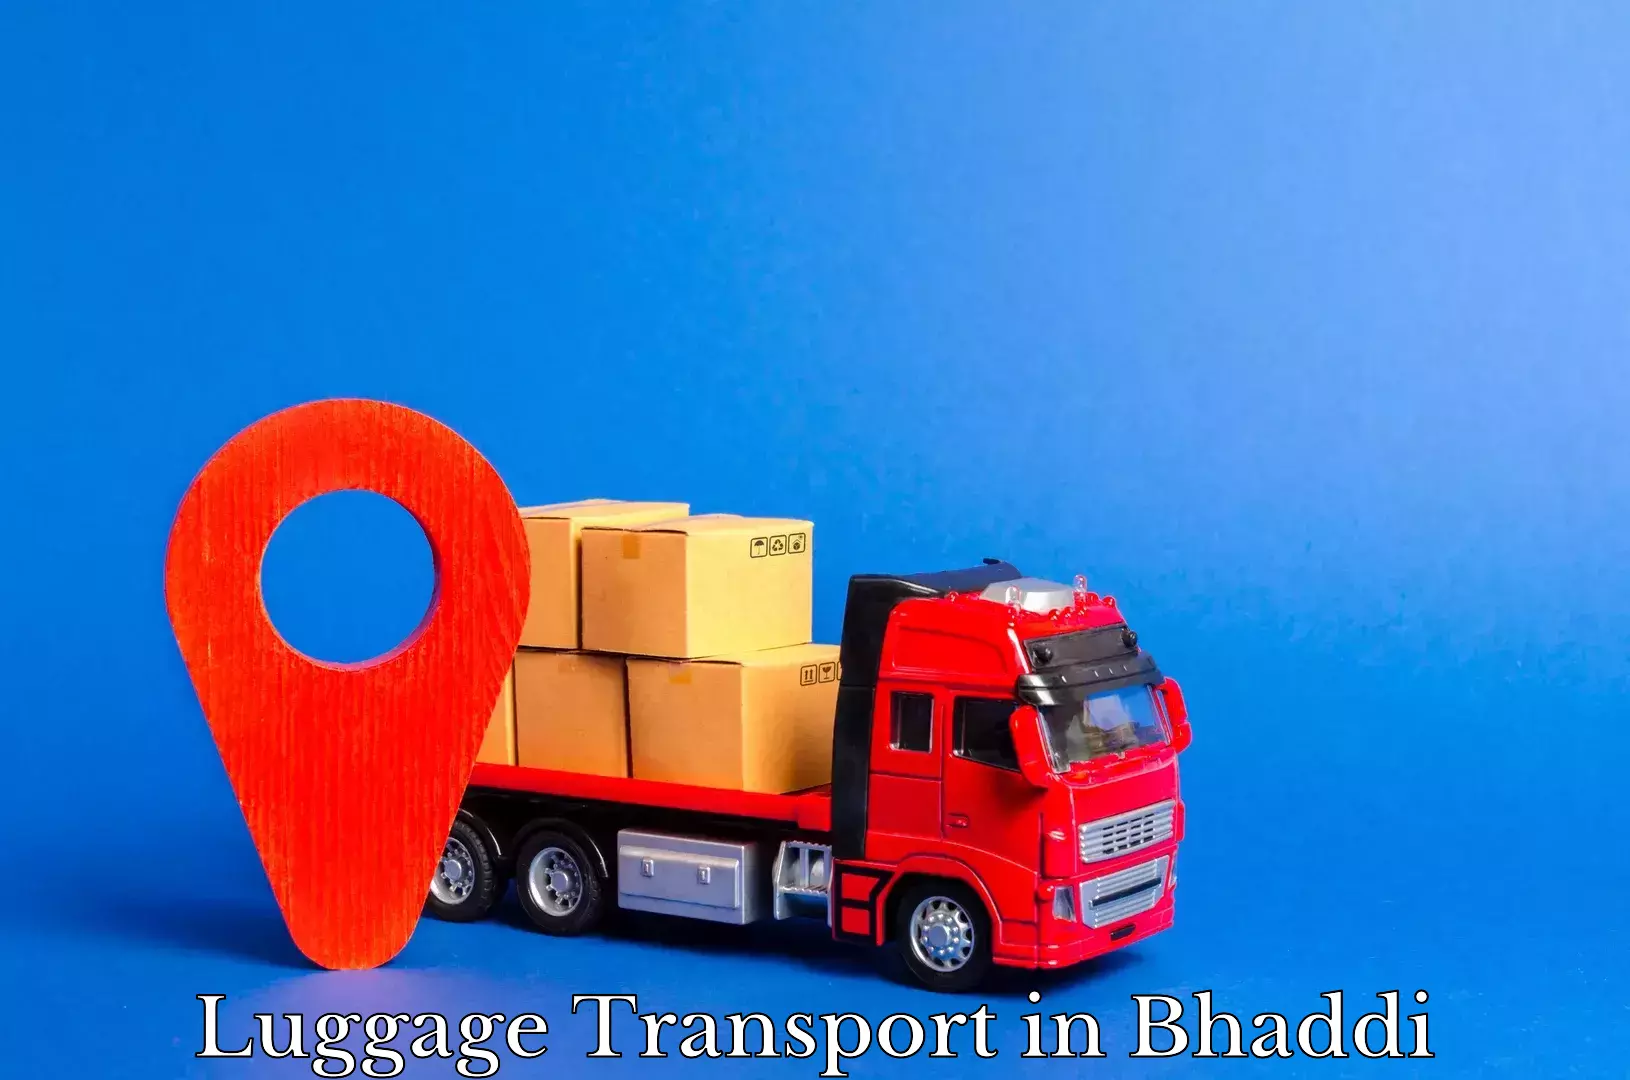 Luggage transport consulting in Bhaddi